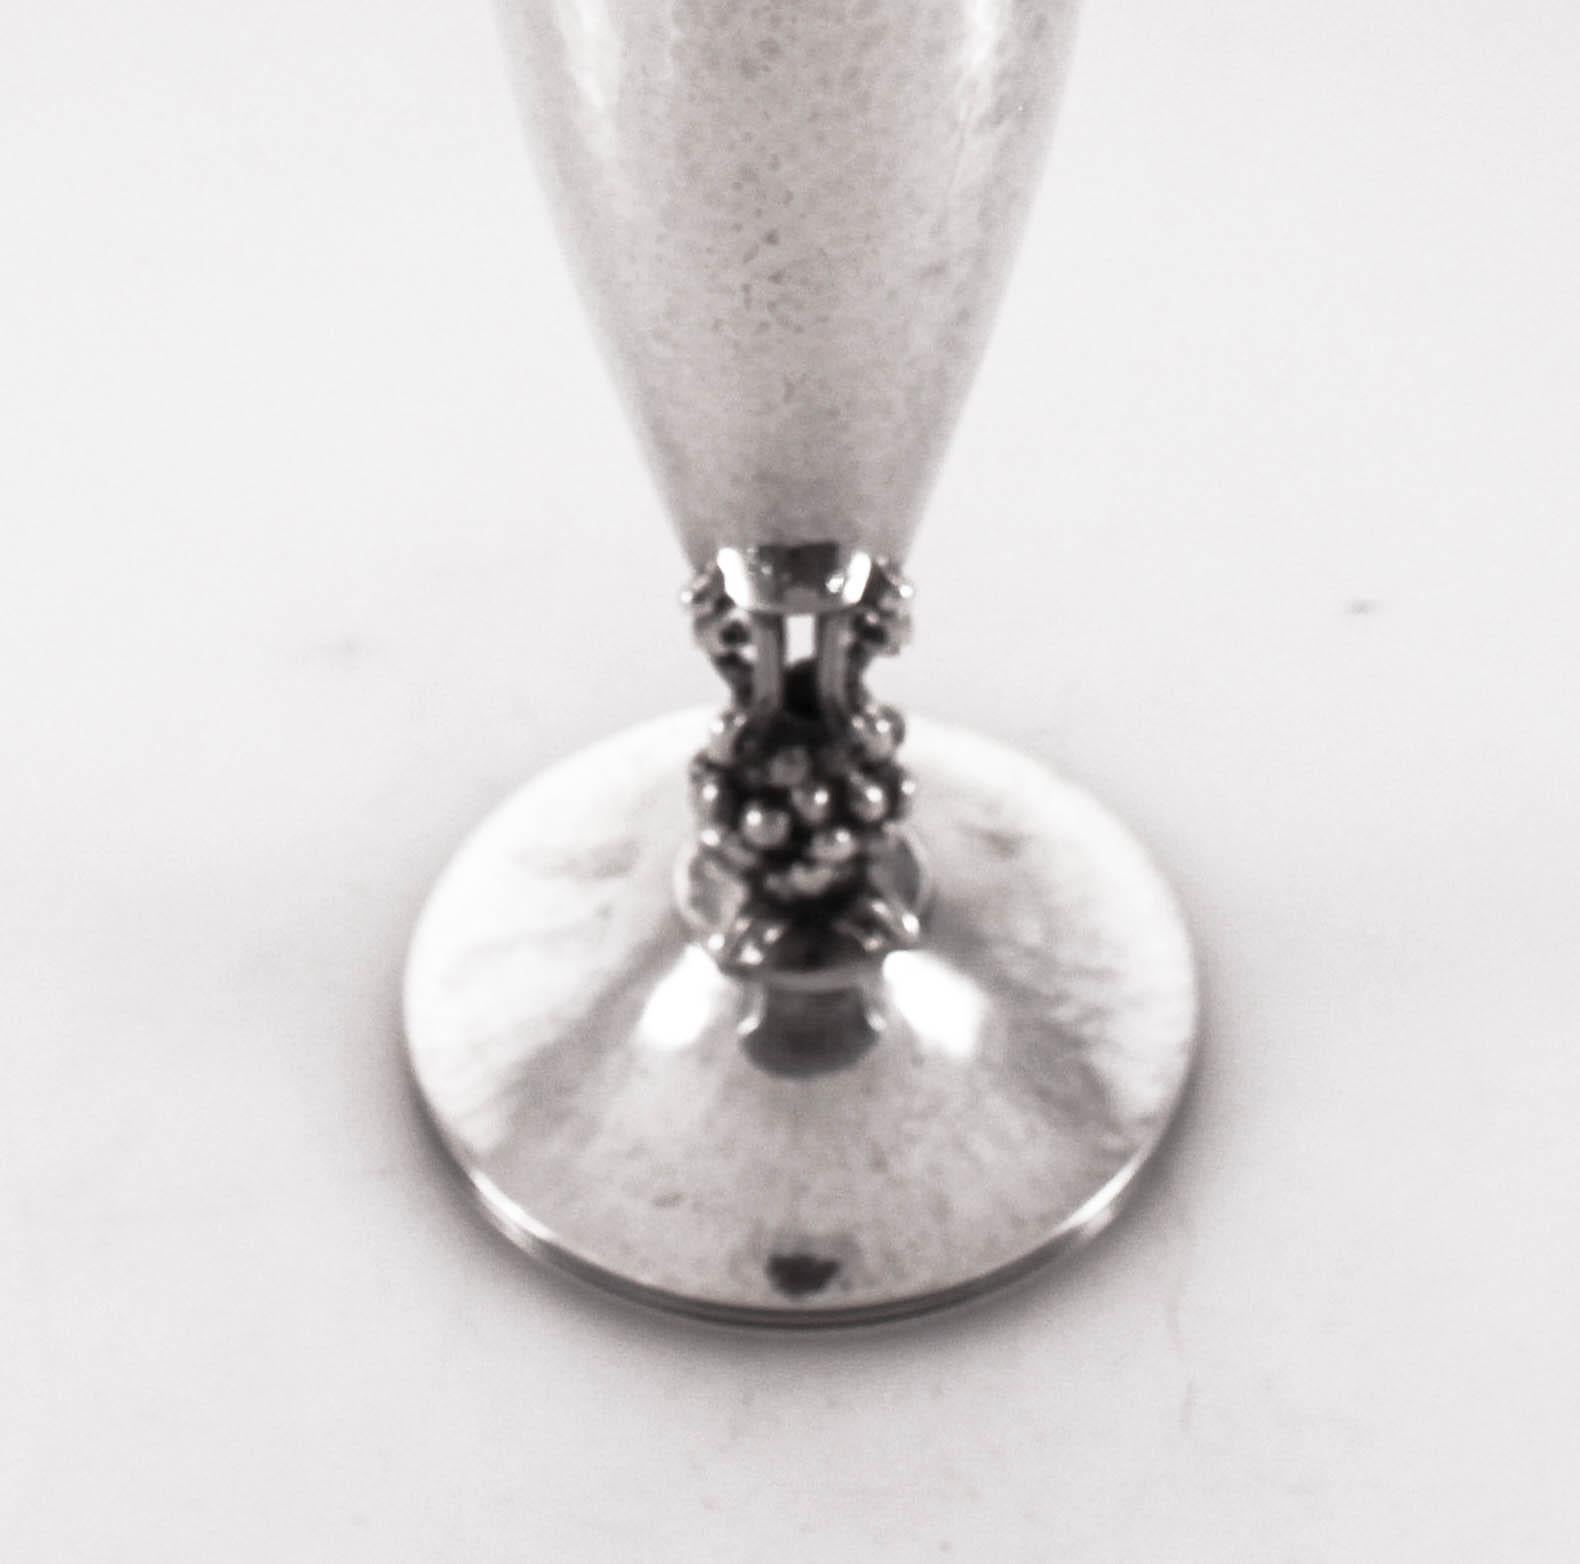 We are proud to offer this sterling silver Danish vase. Hand-hammered and not weighted. It has a beautiful curved oval shape - wider in the center and tailored on top and bottom. Between the base and the top part a cluster of balls holds the two